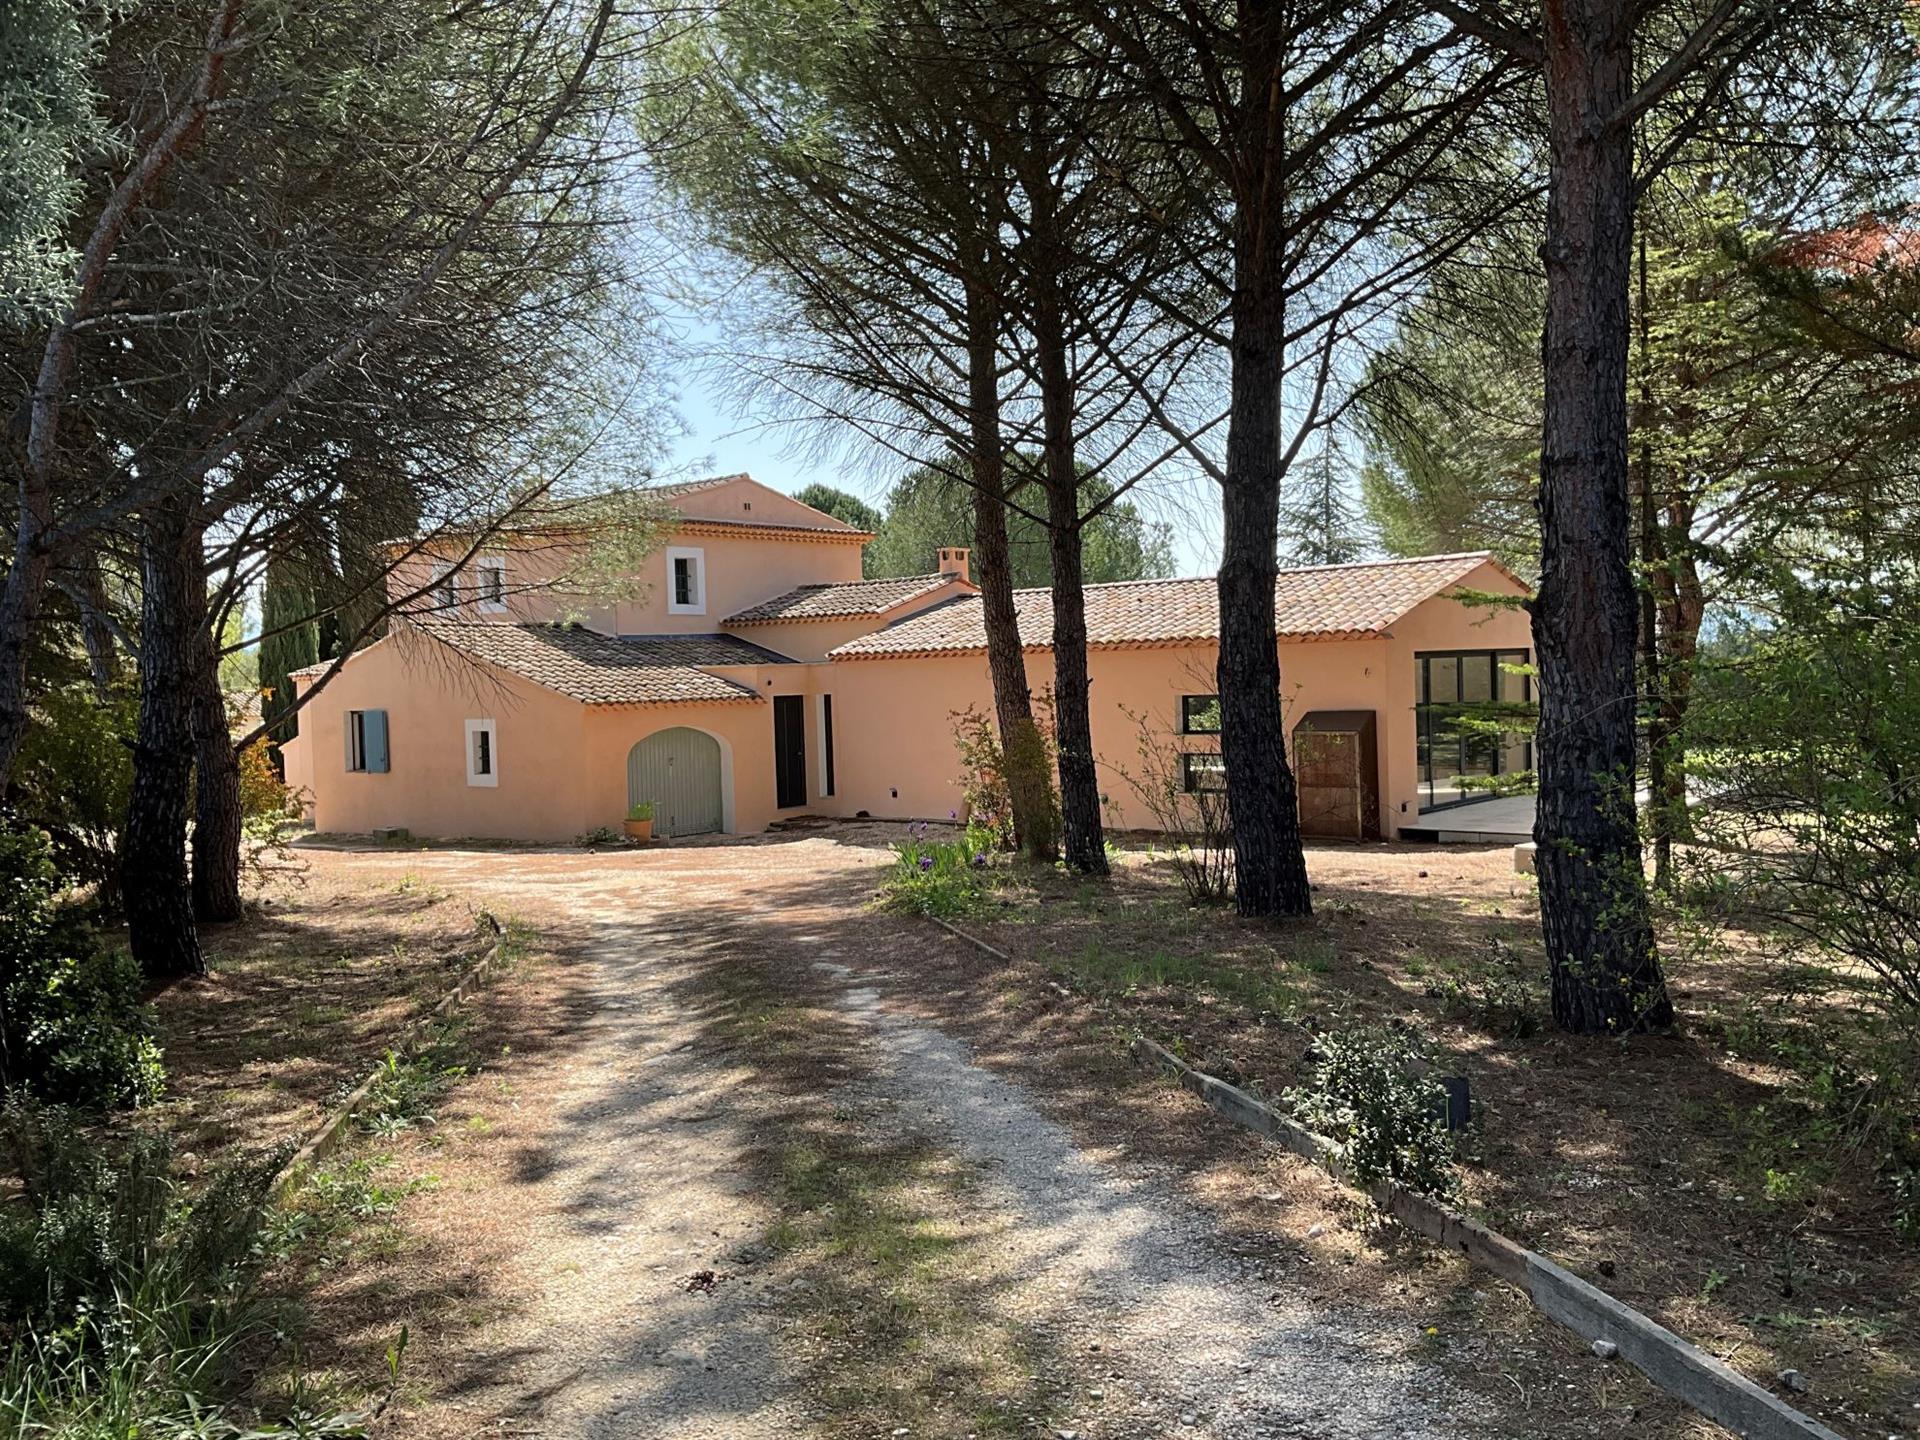 Modern house for sale in Roussillon with a very nice living room and a planted garden